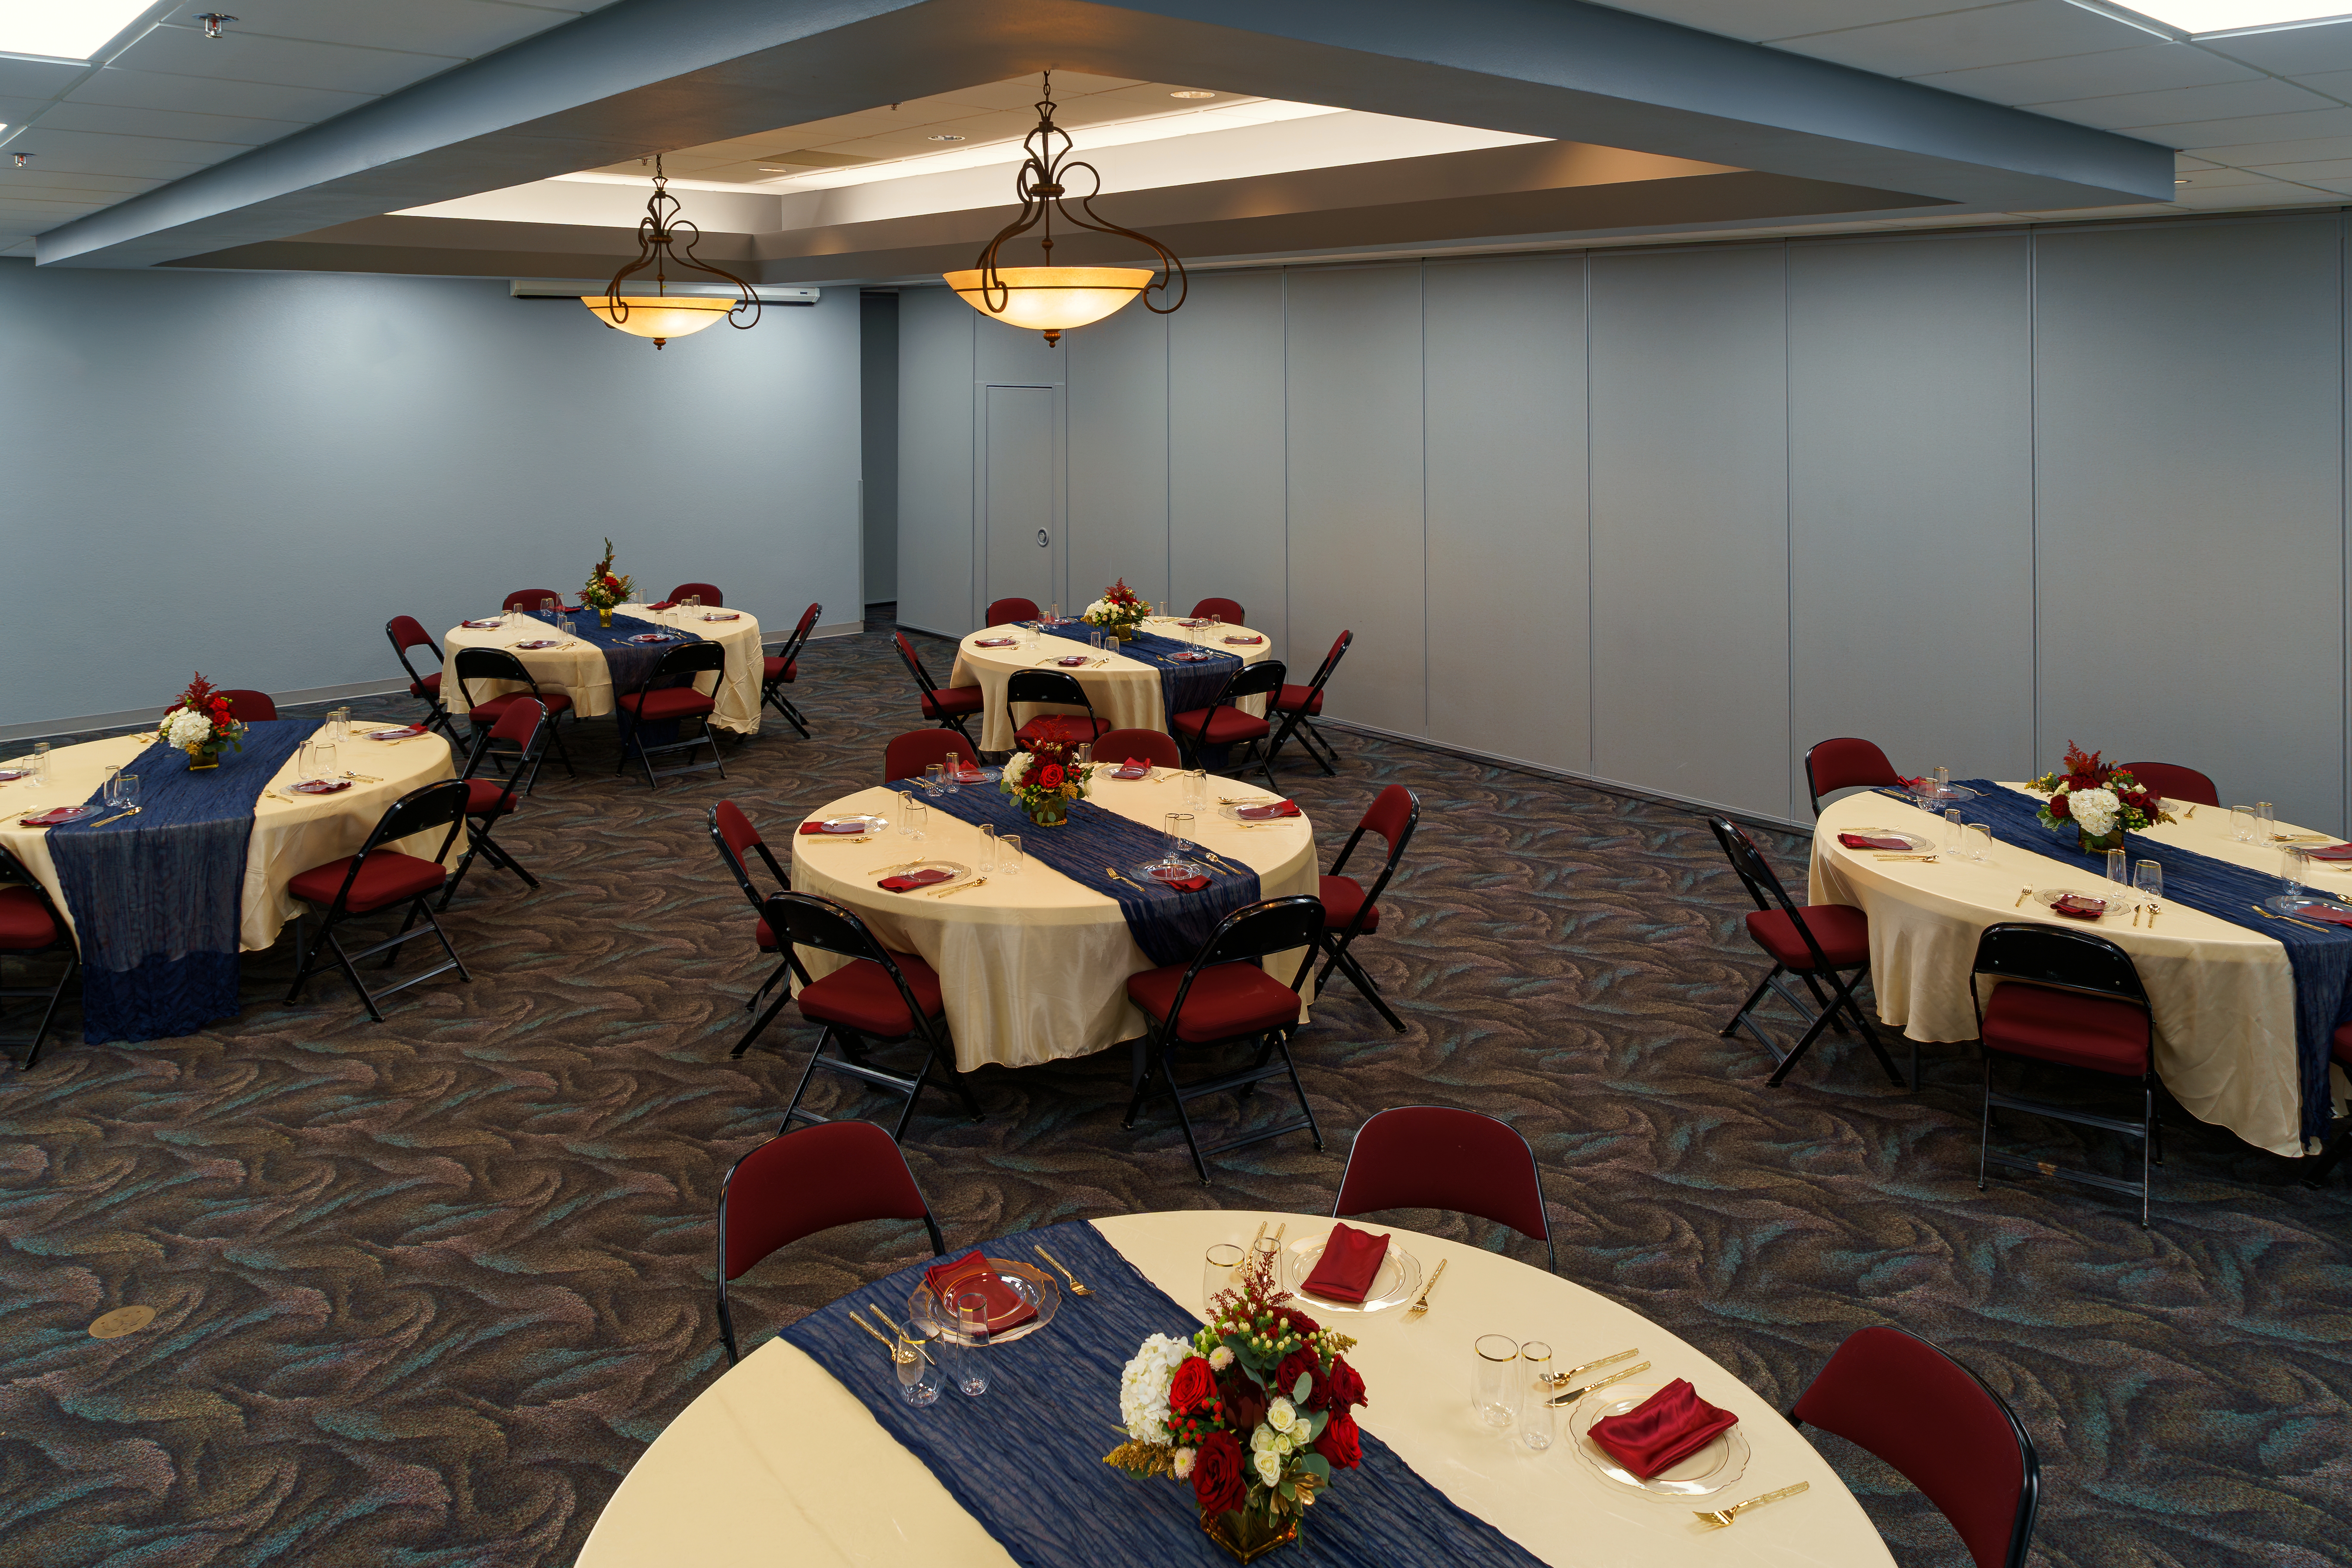 This is a photo of a ballroom at the Kissimmee Civic Center